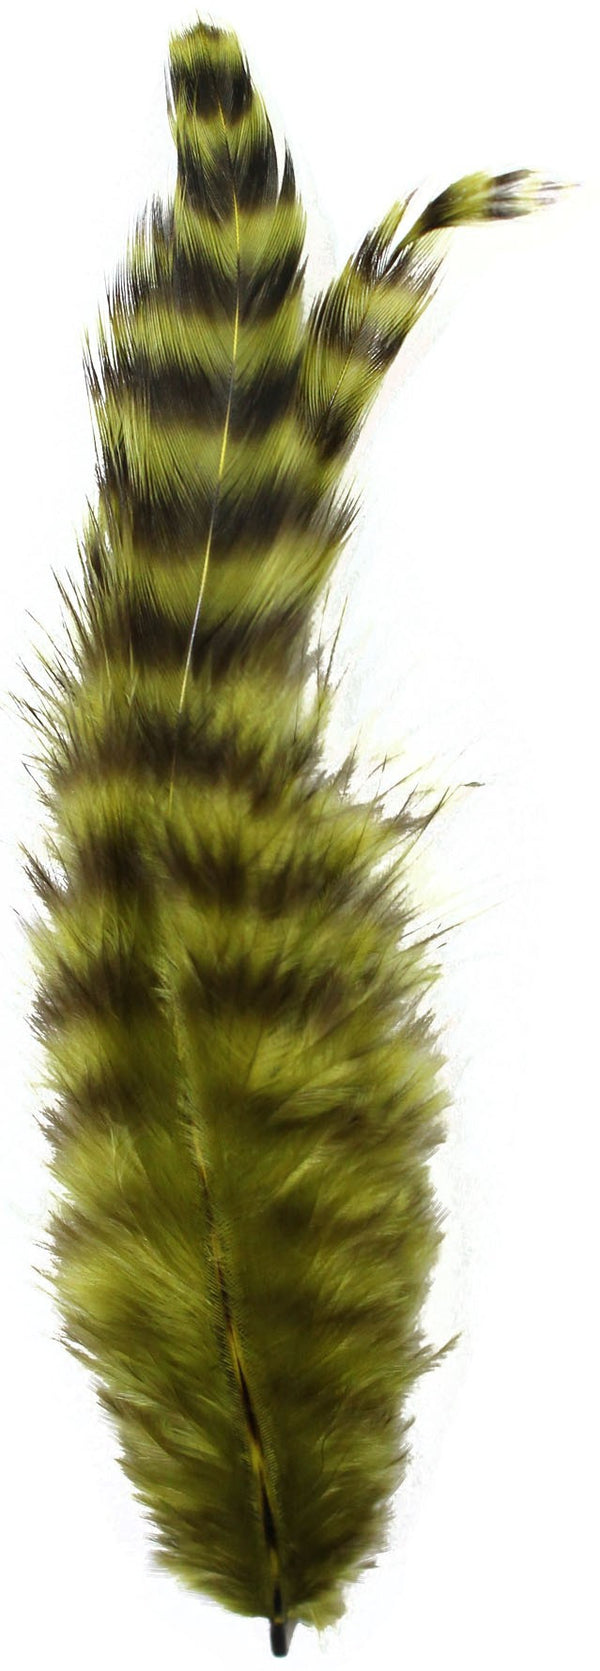 Spirit River UV2 Grizzly Soft Hackle - Fly and Field Outfitters - Online Flyfishing Shop - 7